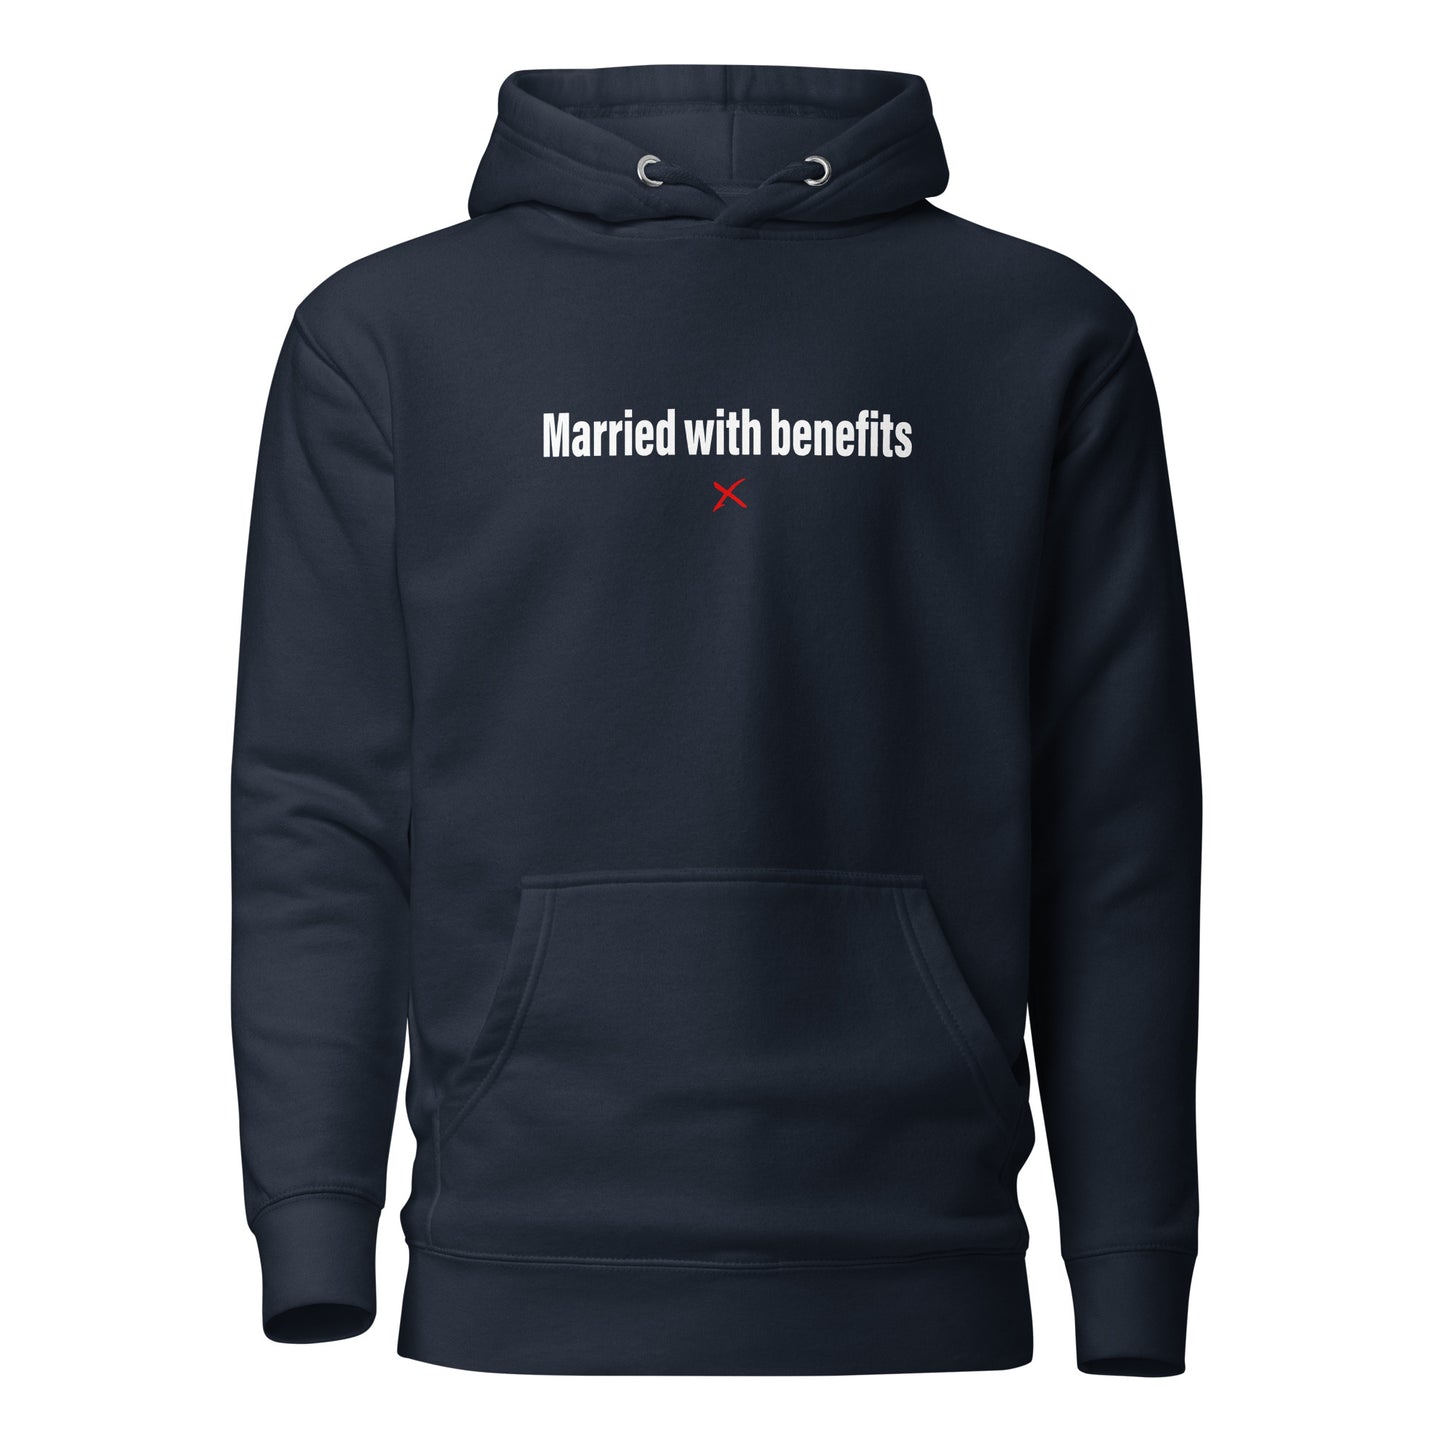 Married with benefits - Hoodie